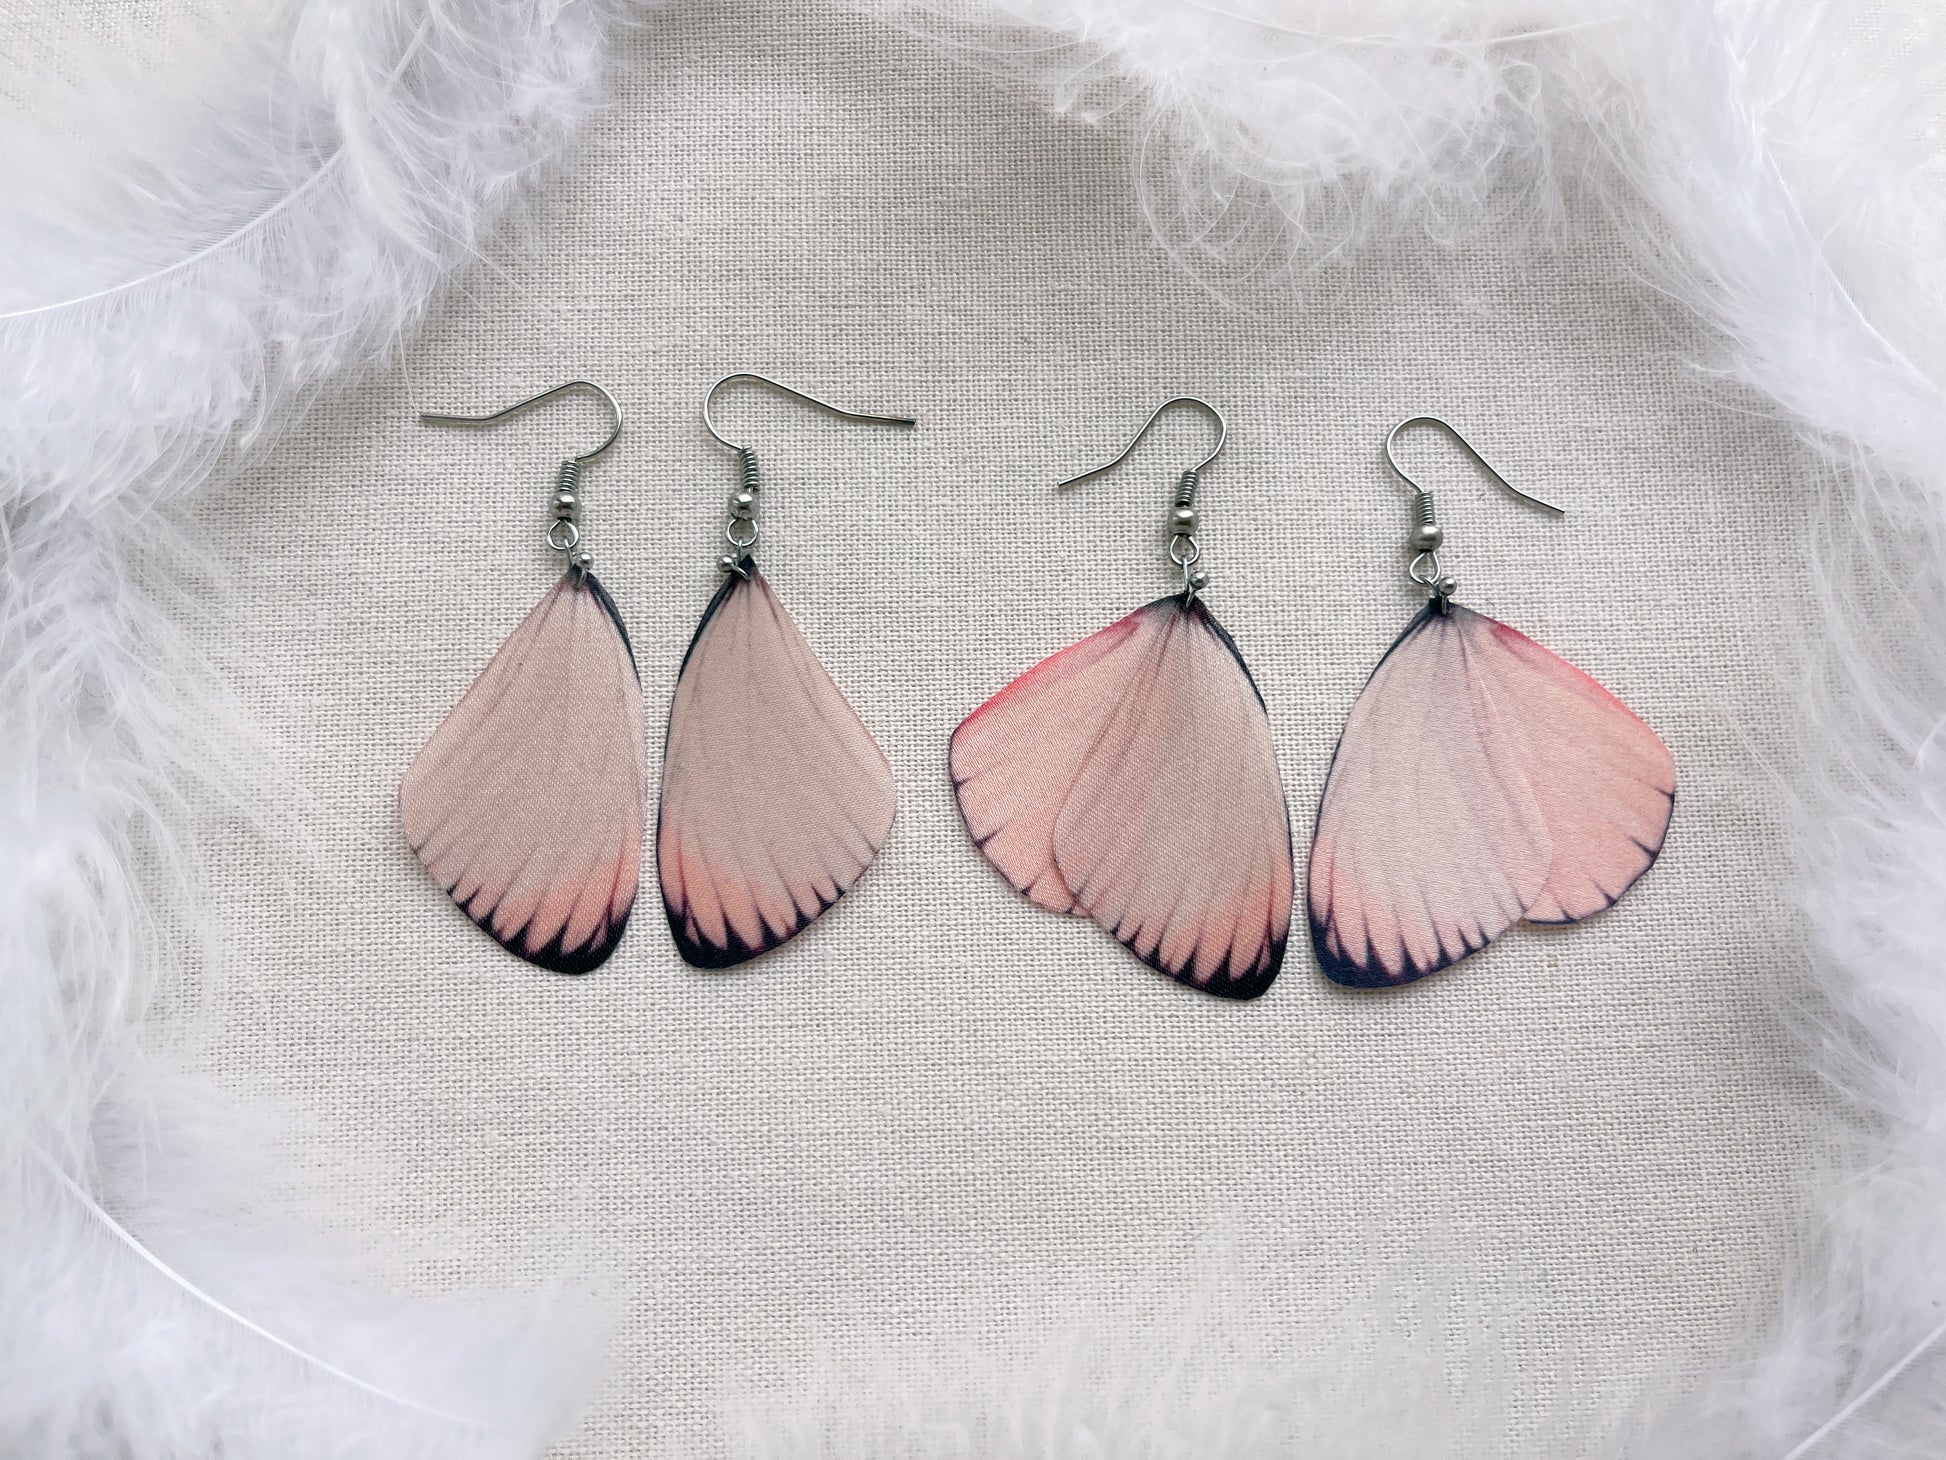 2 Pairs of Butterfly Earrings on White Feathers Background